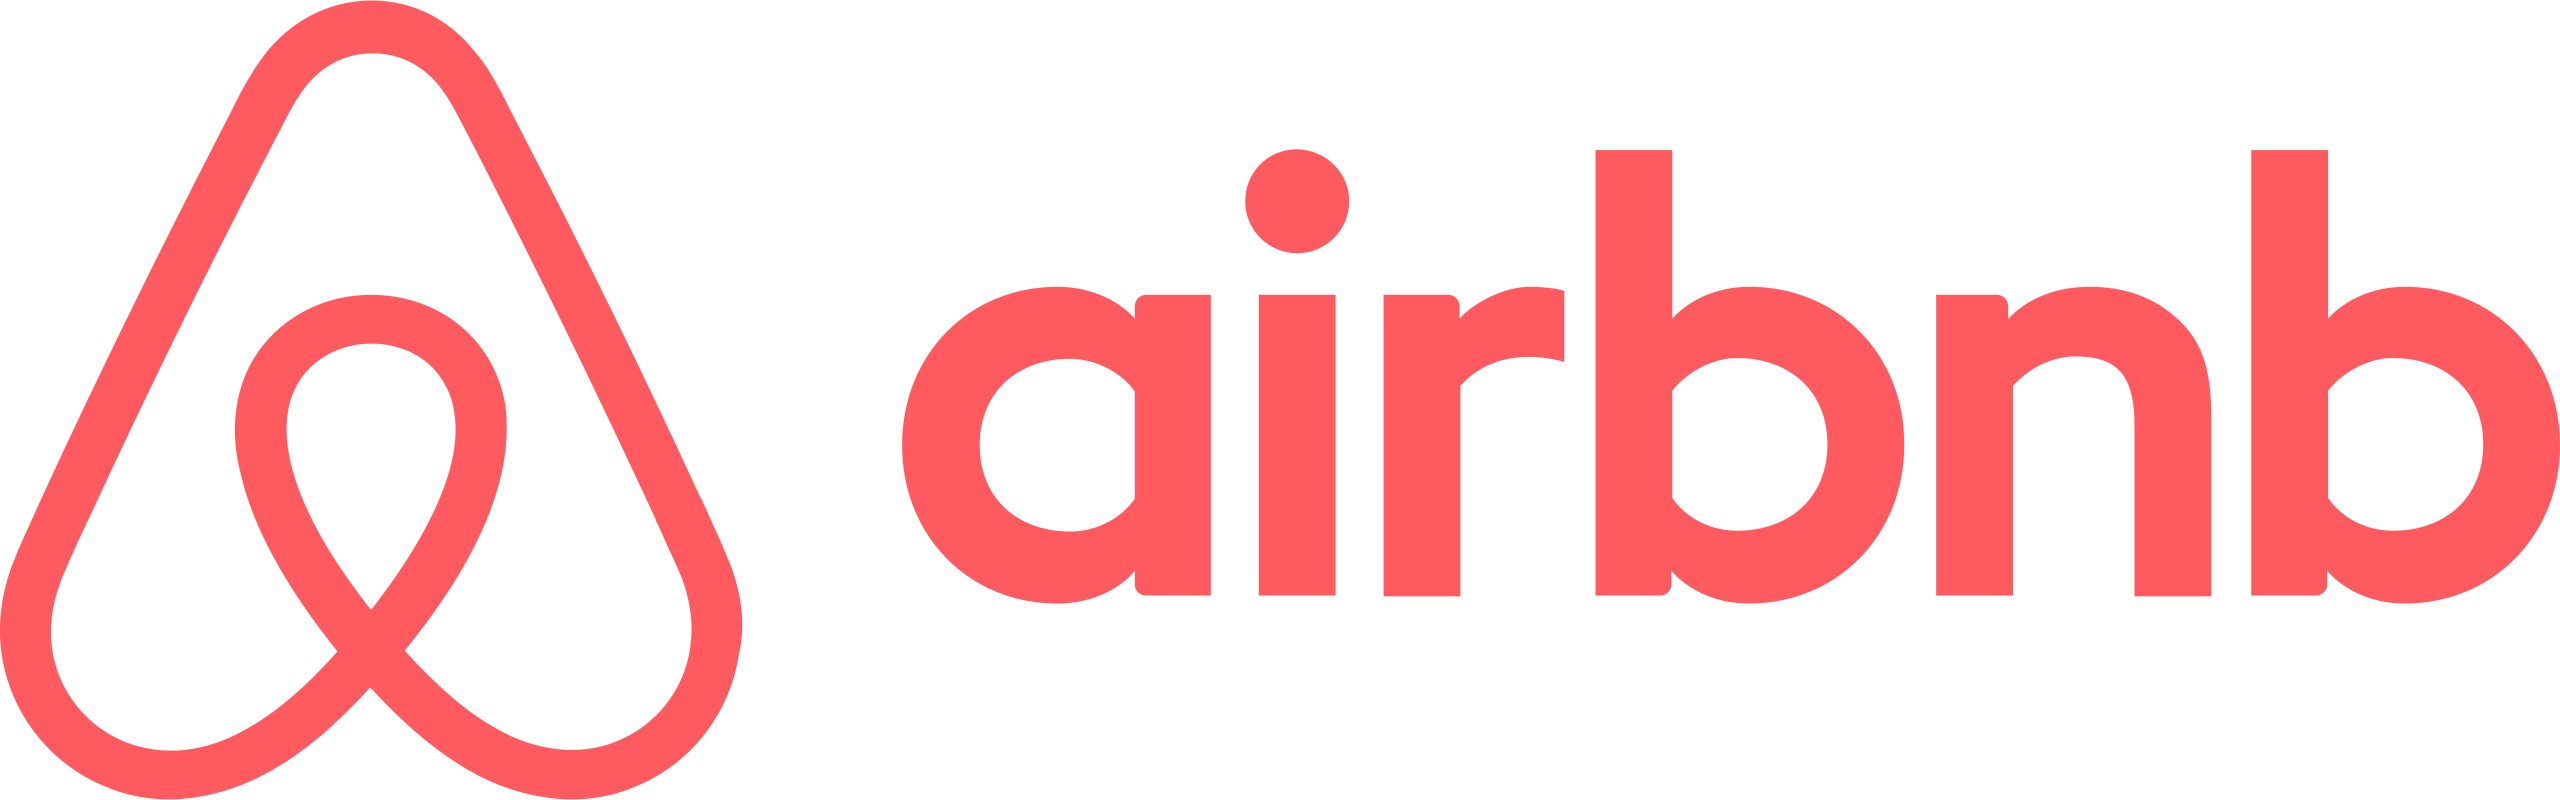 Airbnbのロゴ